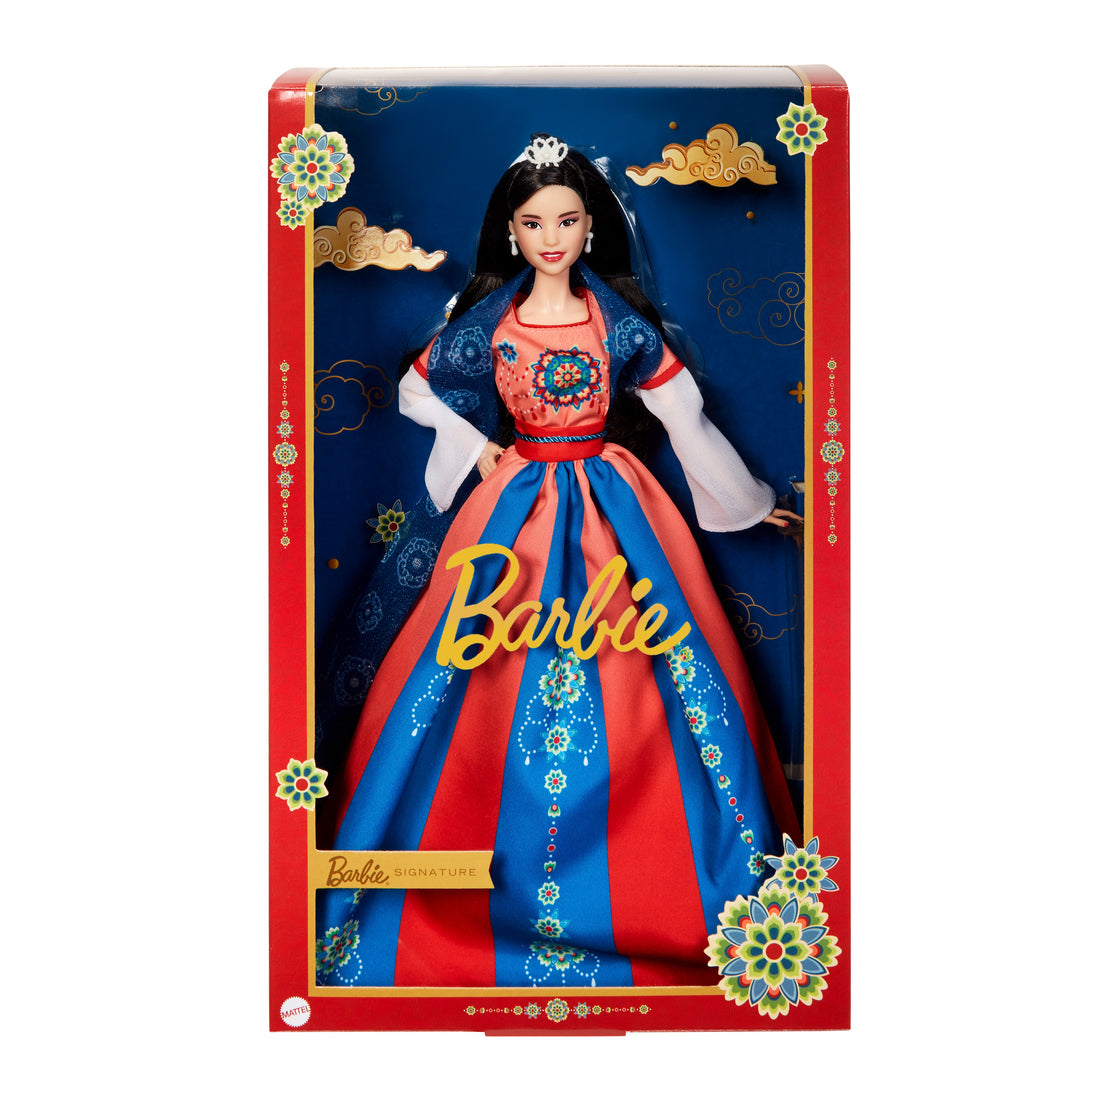 Barbie Lunar New Year Doll - Dolls and Accessories